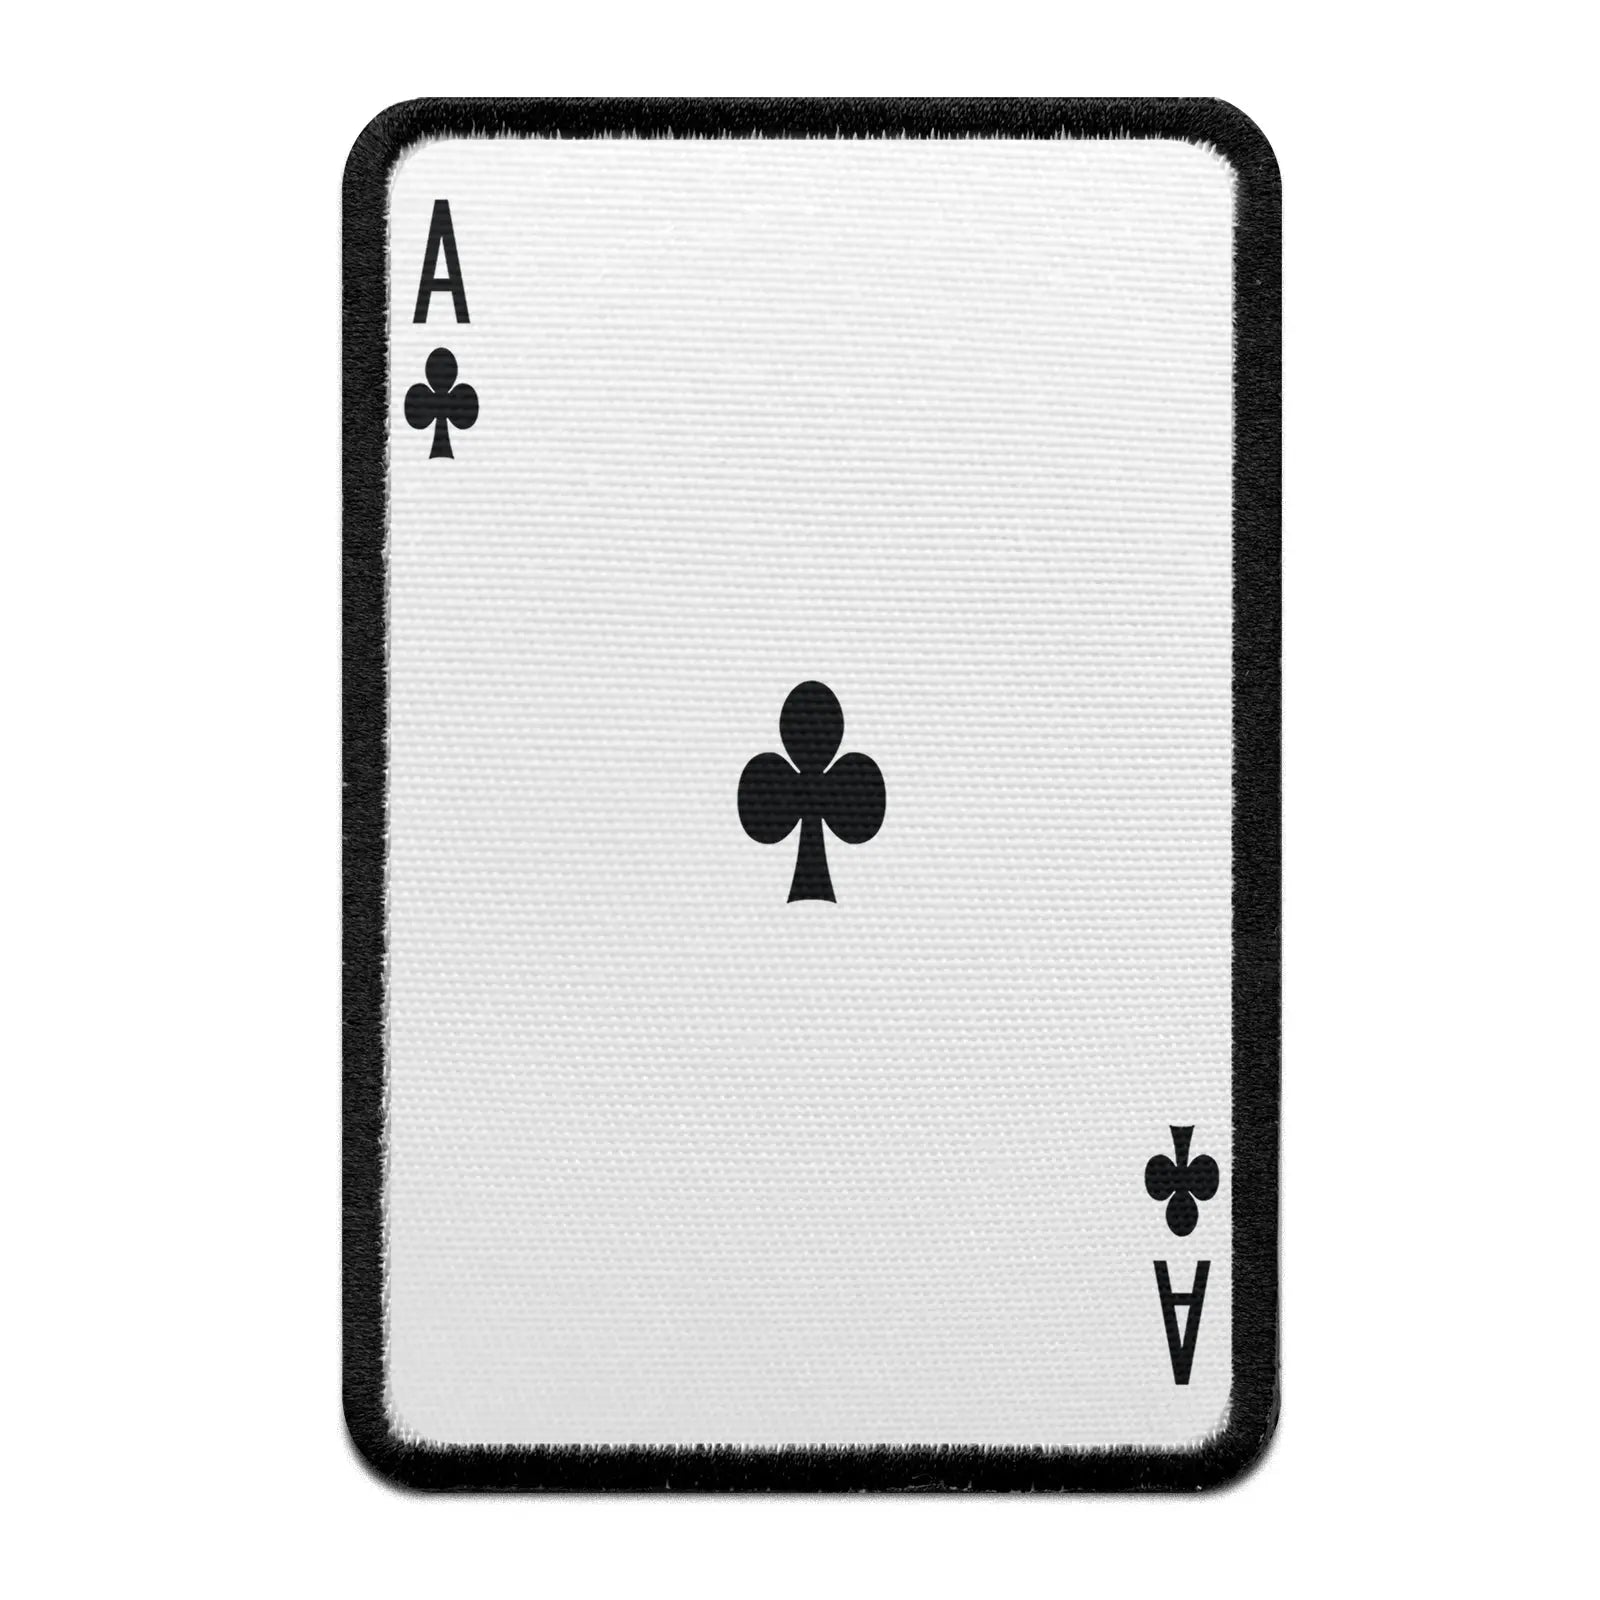 Ace Of Clubs Card FotoPatch Game Deck Embroidered Iron On 